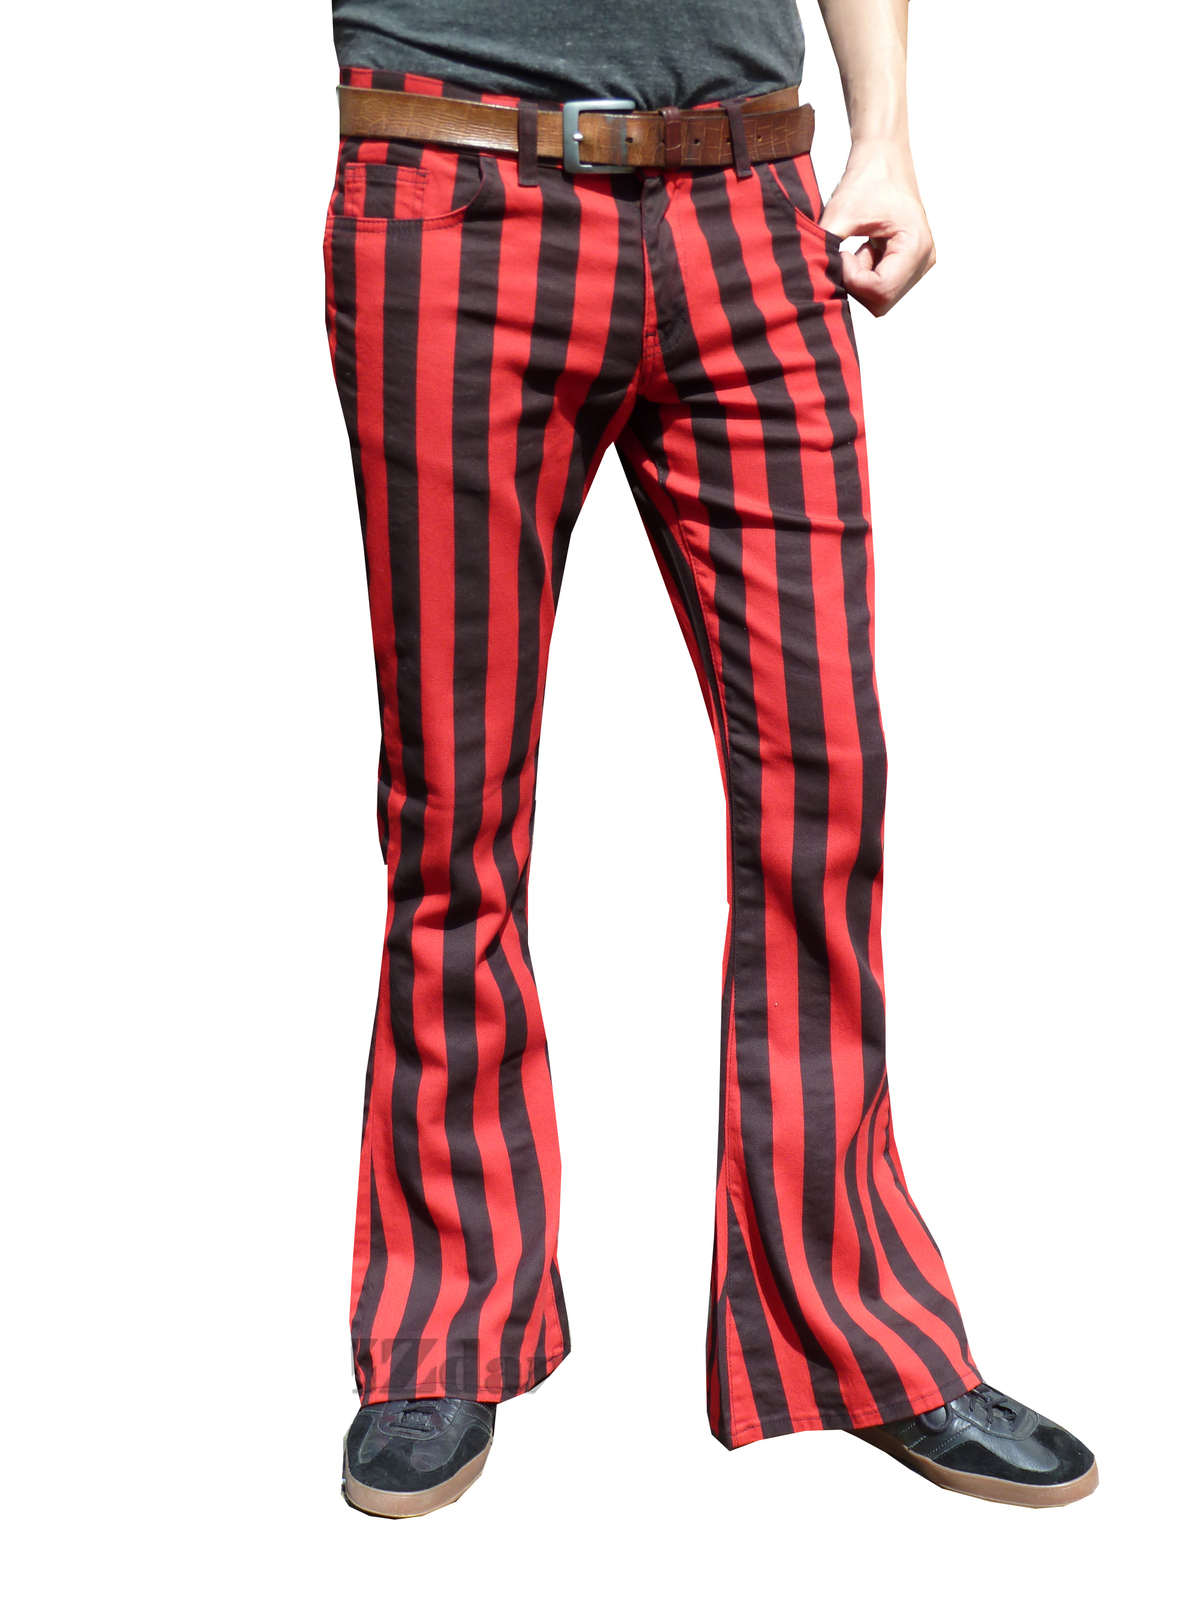 Mens Flares Red Black Striped Flared Bell Bottoms Pants Hippie 60's ...